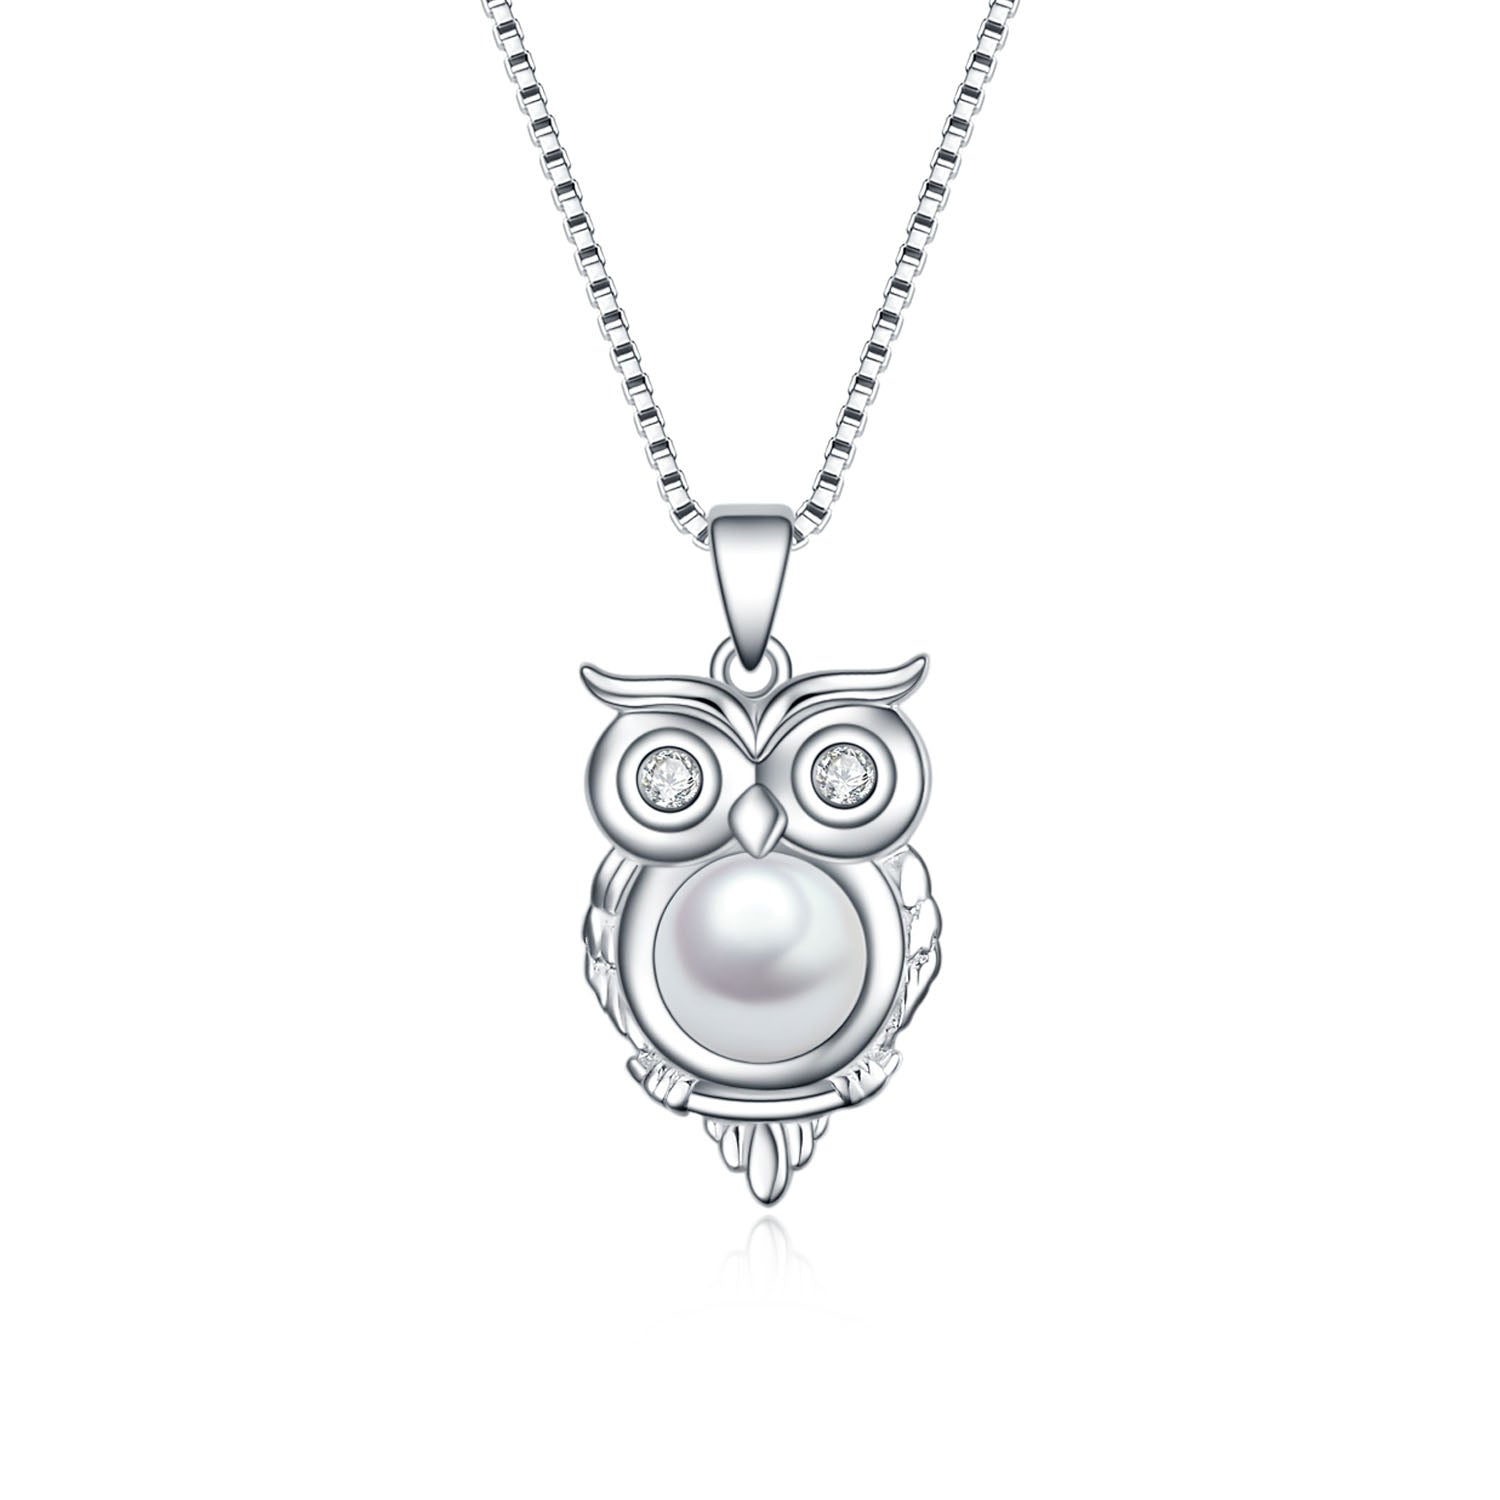 Wisdom Sterling Silver Pearl Owl Necklace